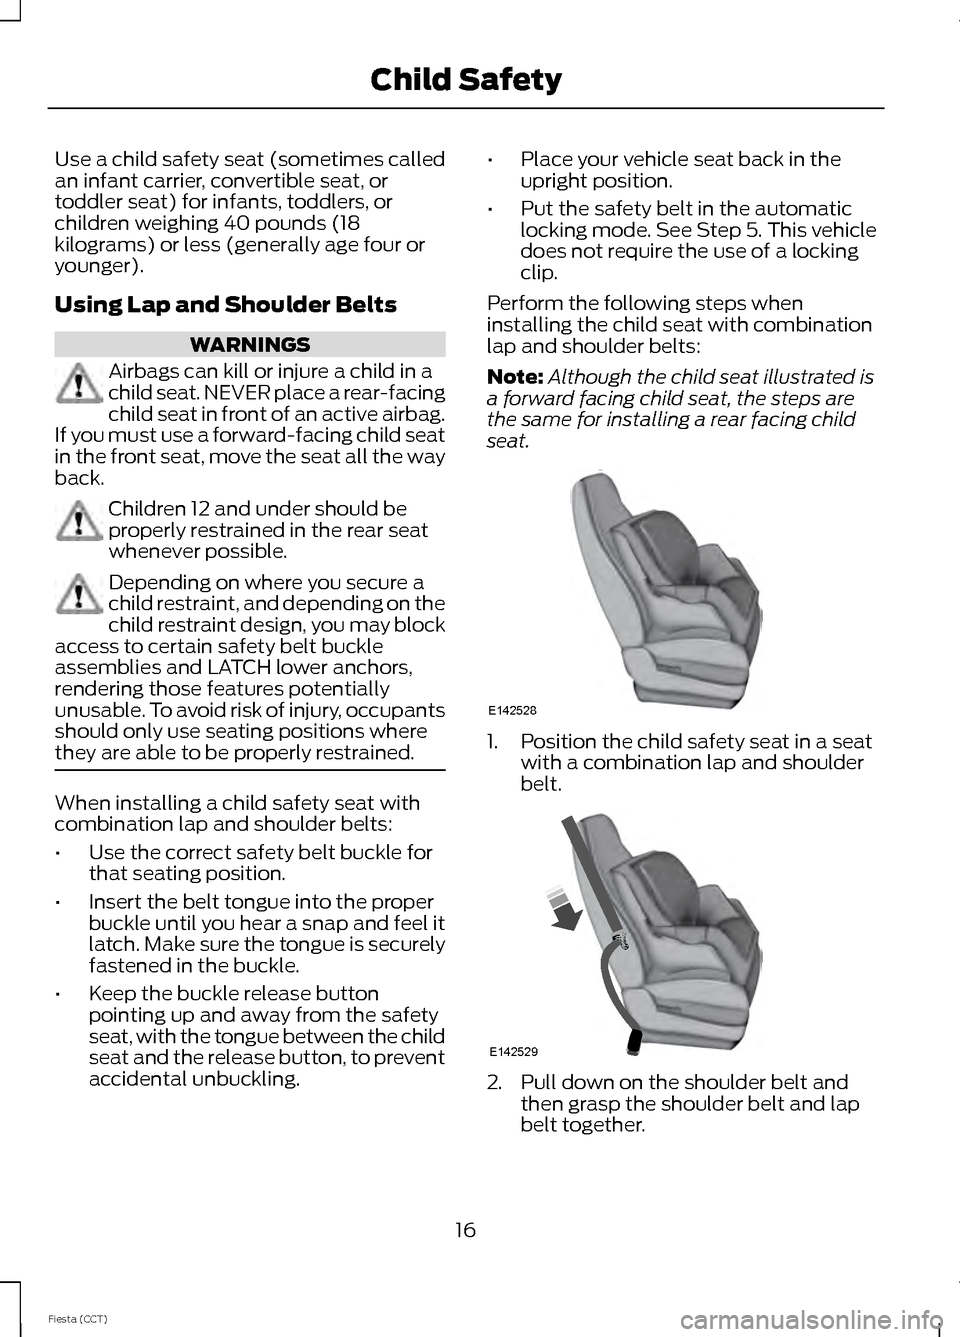 FORD FIESTA 2014 6.G Owners Manual Use a child safety seat (sometimes called
an infant carrier, convertible seat, or
toddler seat) for infants, toddlers, or
children weighing 40 pounds (18
kilograms) or less (generally age four or
youn